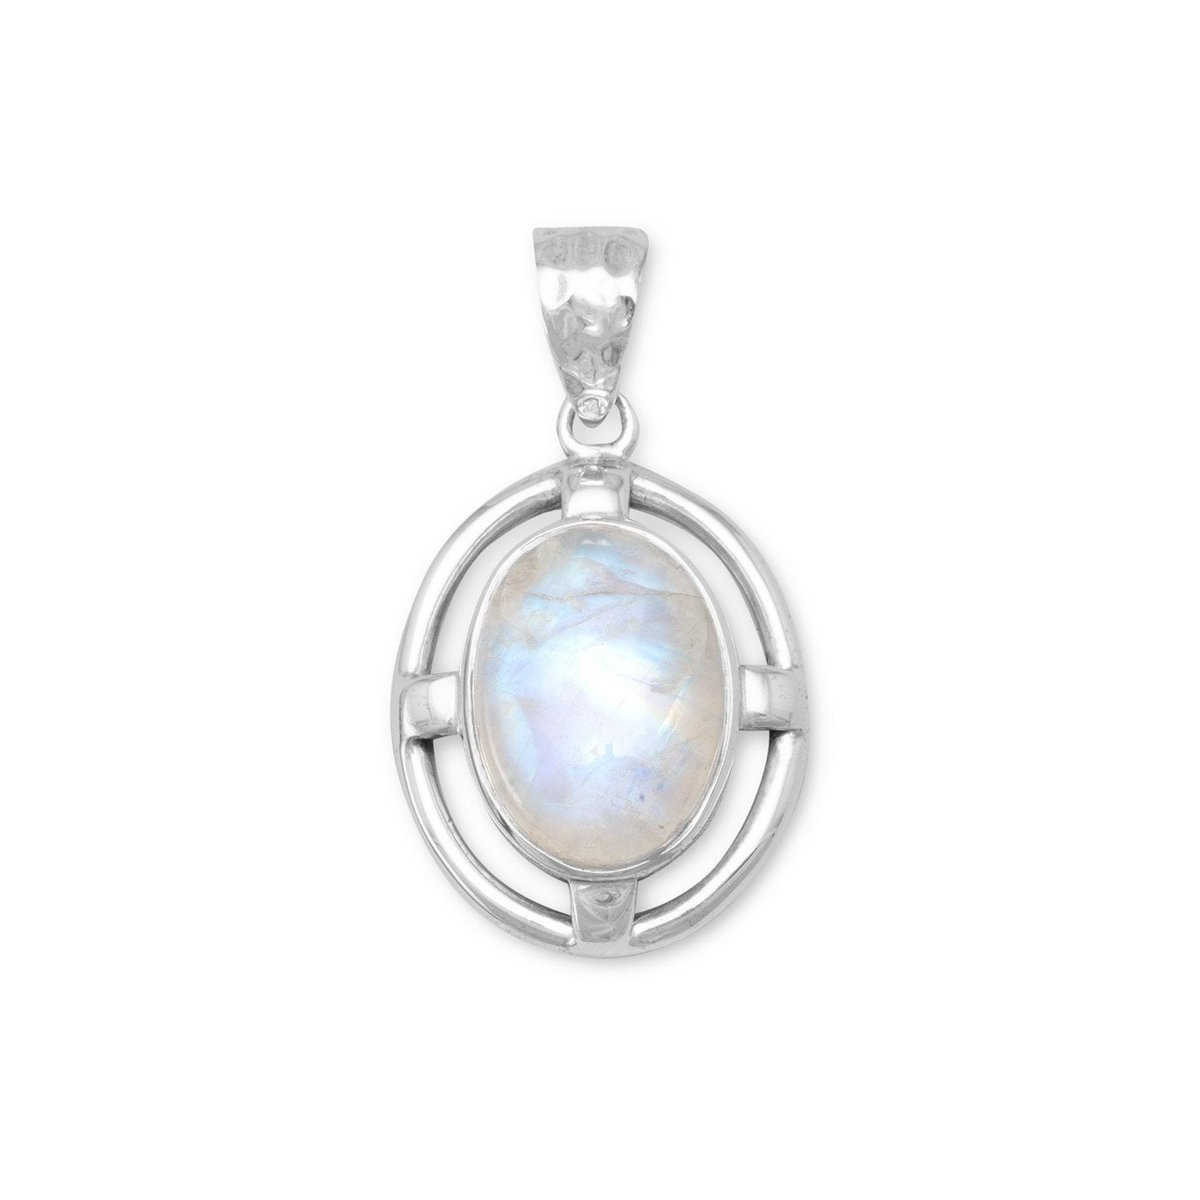 Rainbow Moonstone Pendant - Fine Sterling Silver Cut Out Design Pendant with a Hammered Finish Bale, Featuring a Genuine Rainbow Moonstone tuppu.net/1965d510 #Etsy #jewelrymandave #MoonstonePendant